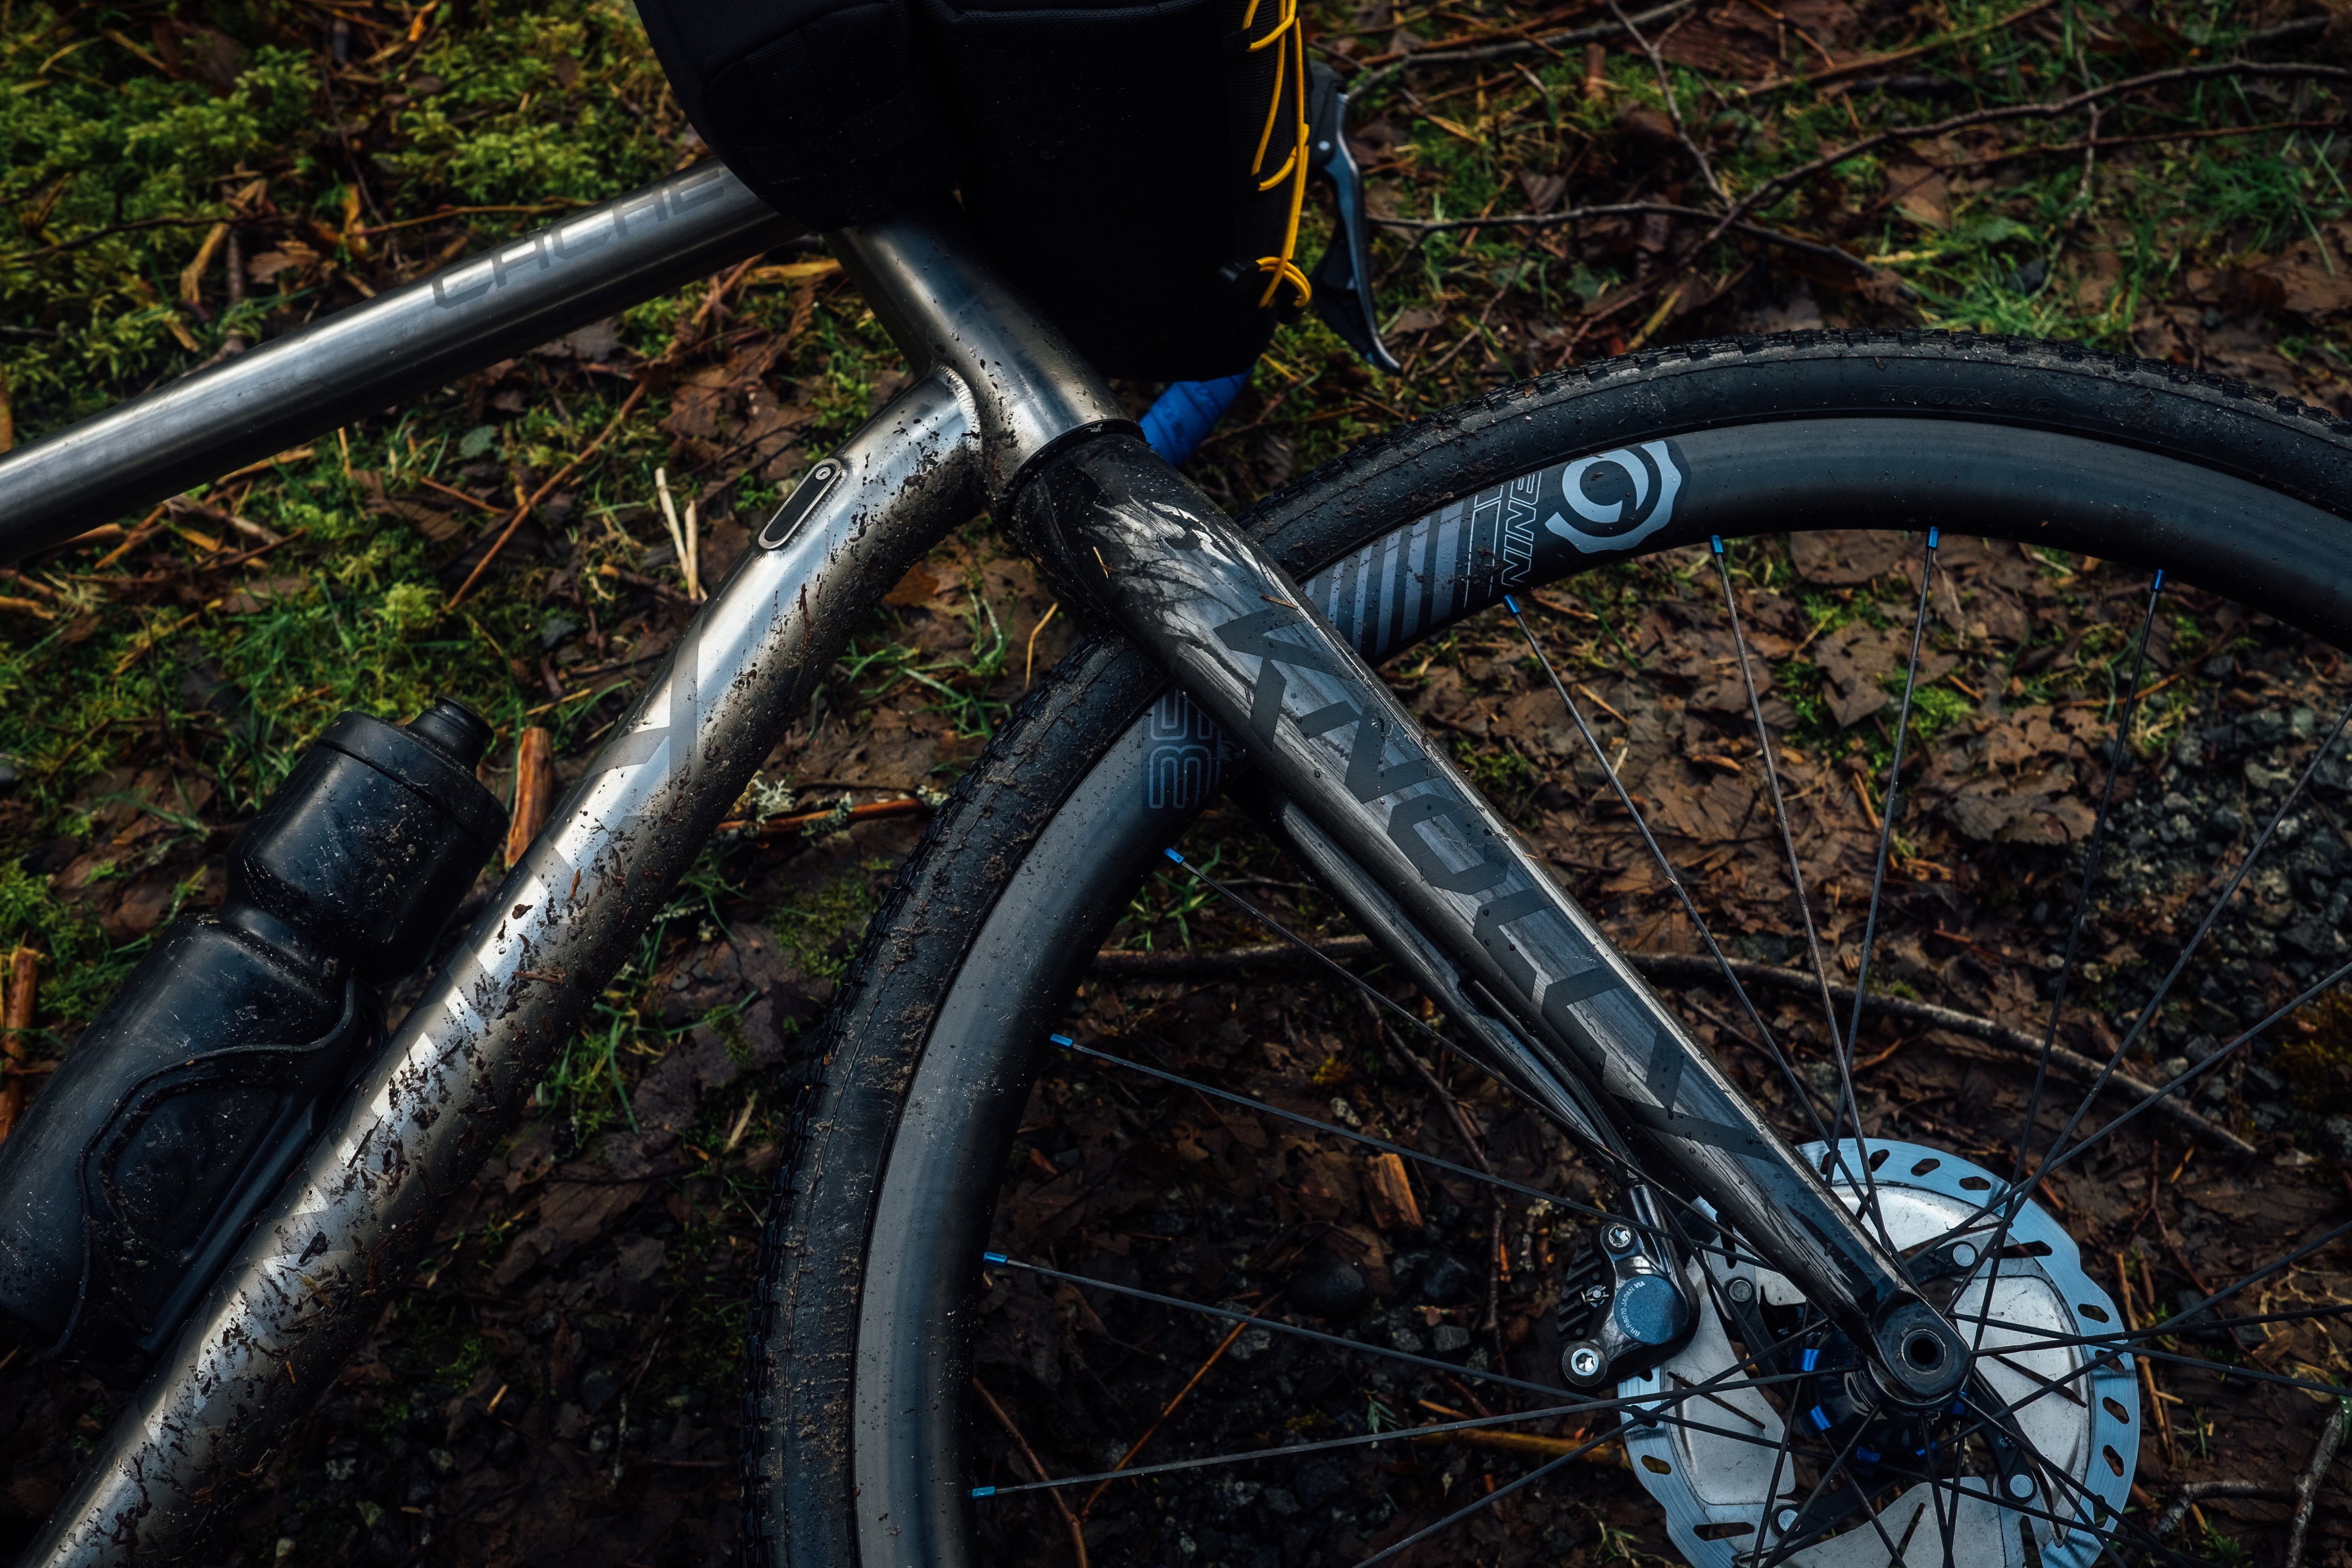 The Cache carbon fork